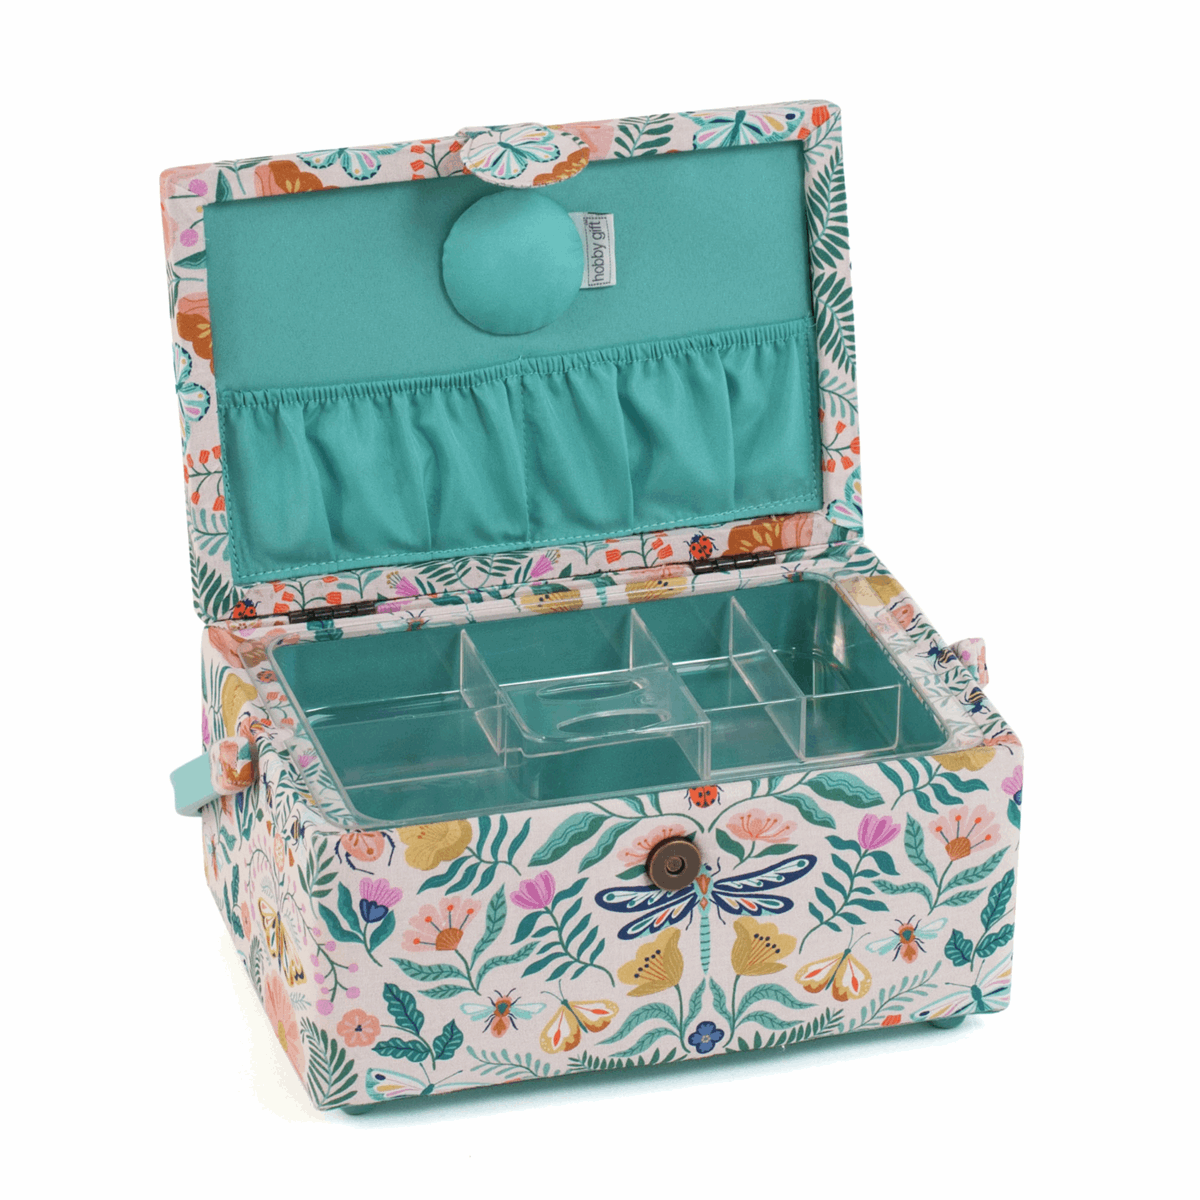 Flutterby Sewing Box with Plastic Handle - Medium